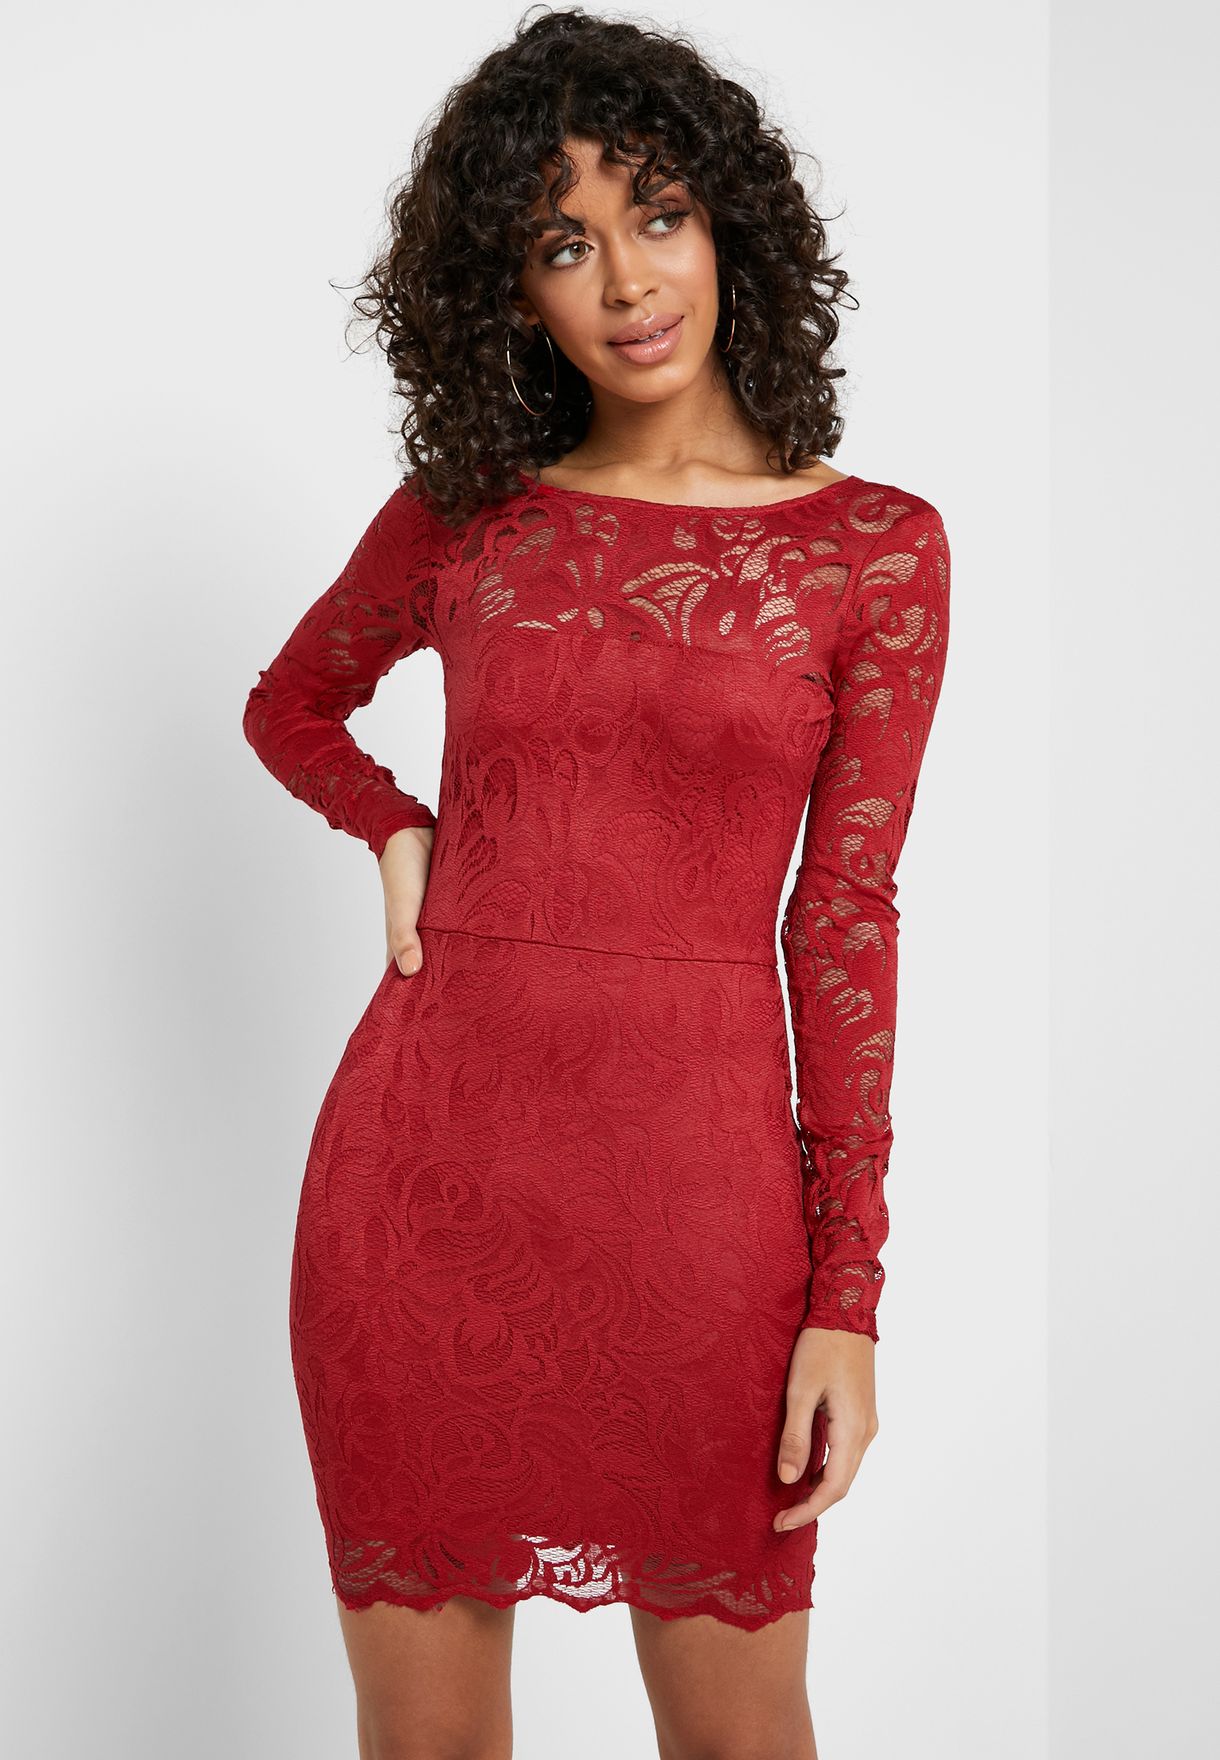 Forever 21 Lace Dress Hotsell, 53% OFF ...